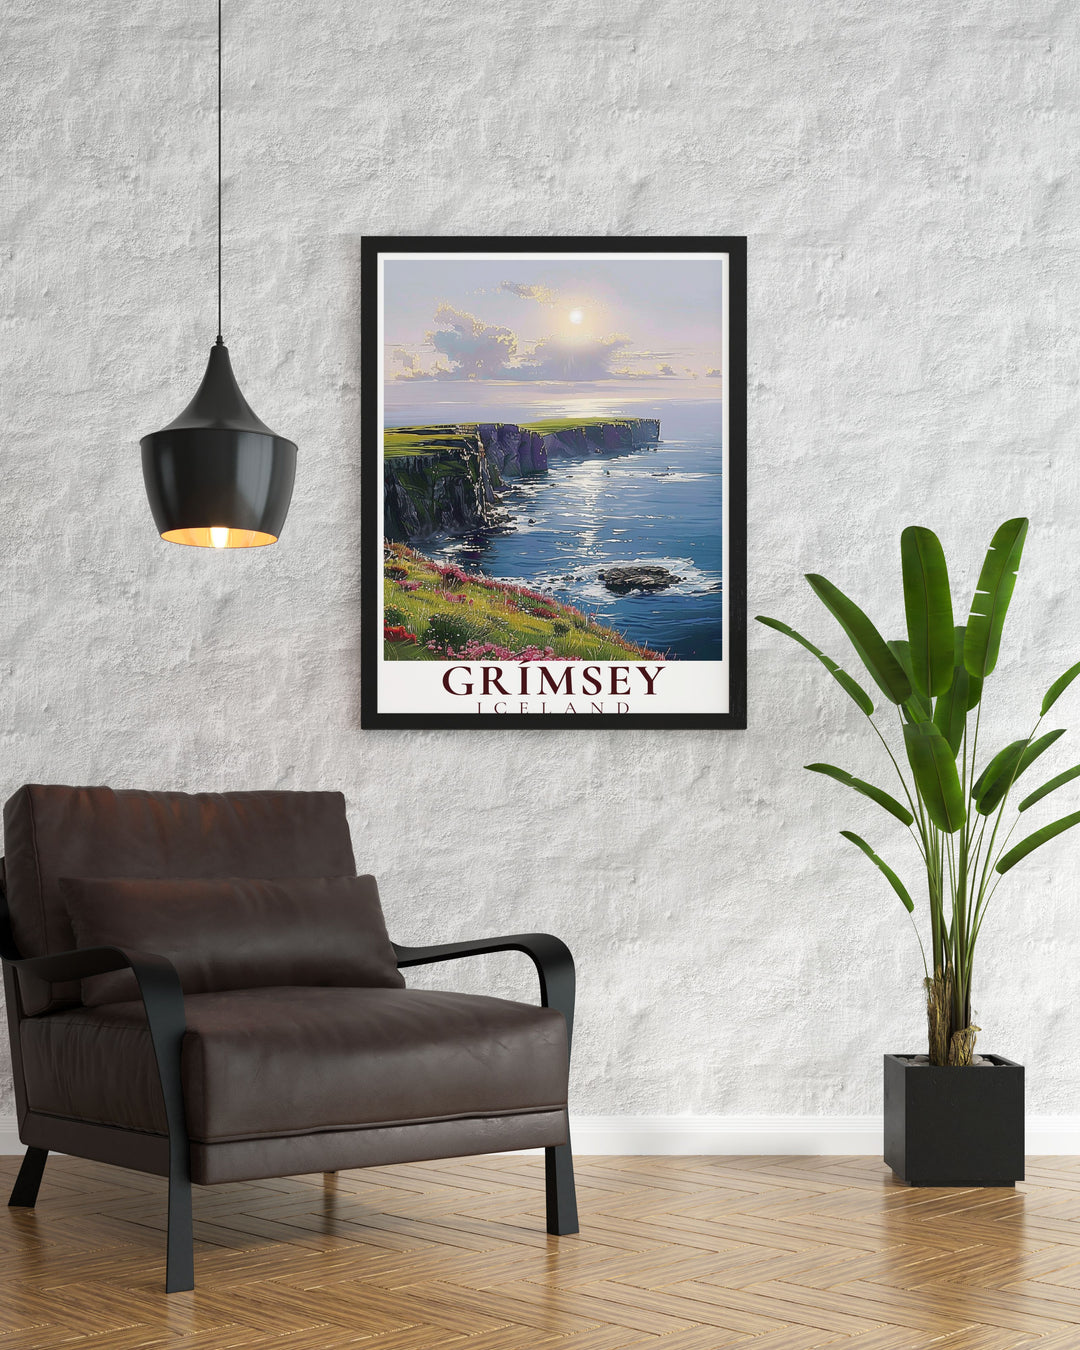 This vibrant depiction of Grimsey Island features the enchanting Northern Lights, dramatic cliffs, and historic lighthouse, making it a captivating piece for your home decor.